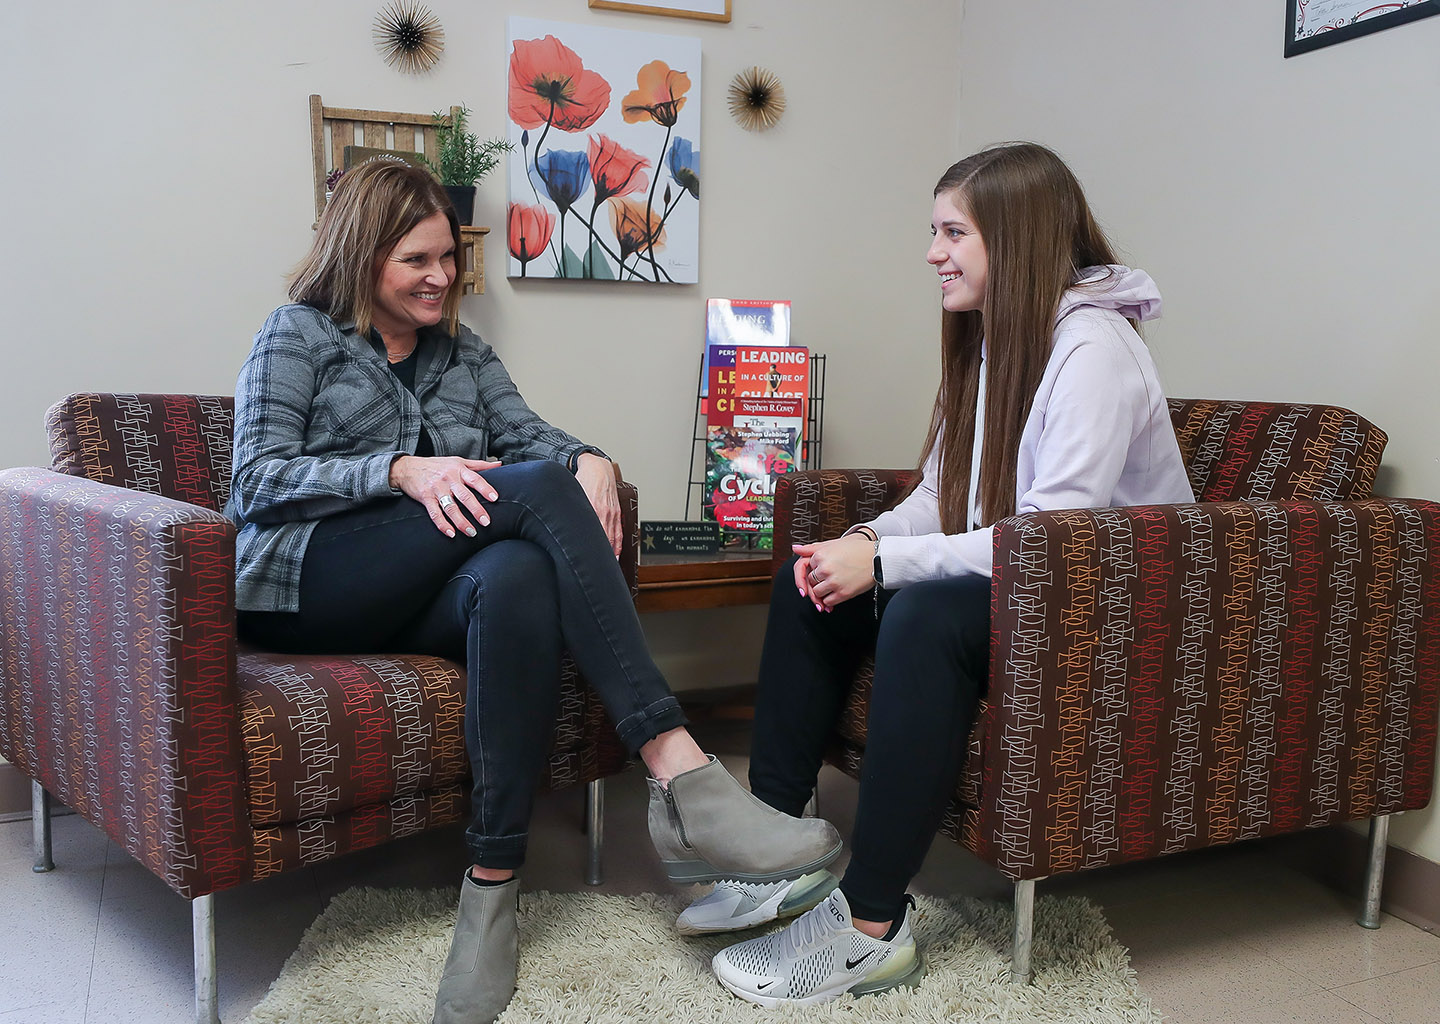 UNK student success coordinator Julie Everett, left, meets regularly with Karlie Wies and other freshmen, providing an additional level of support as they transition to college. (Photos by Erika Pritchard, UNK Communications)